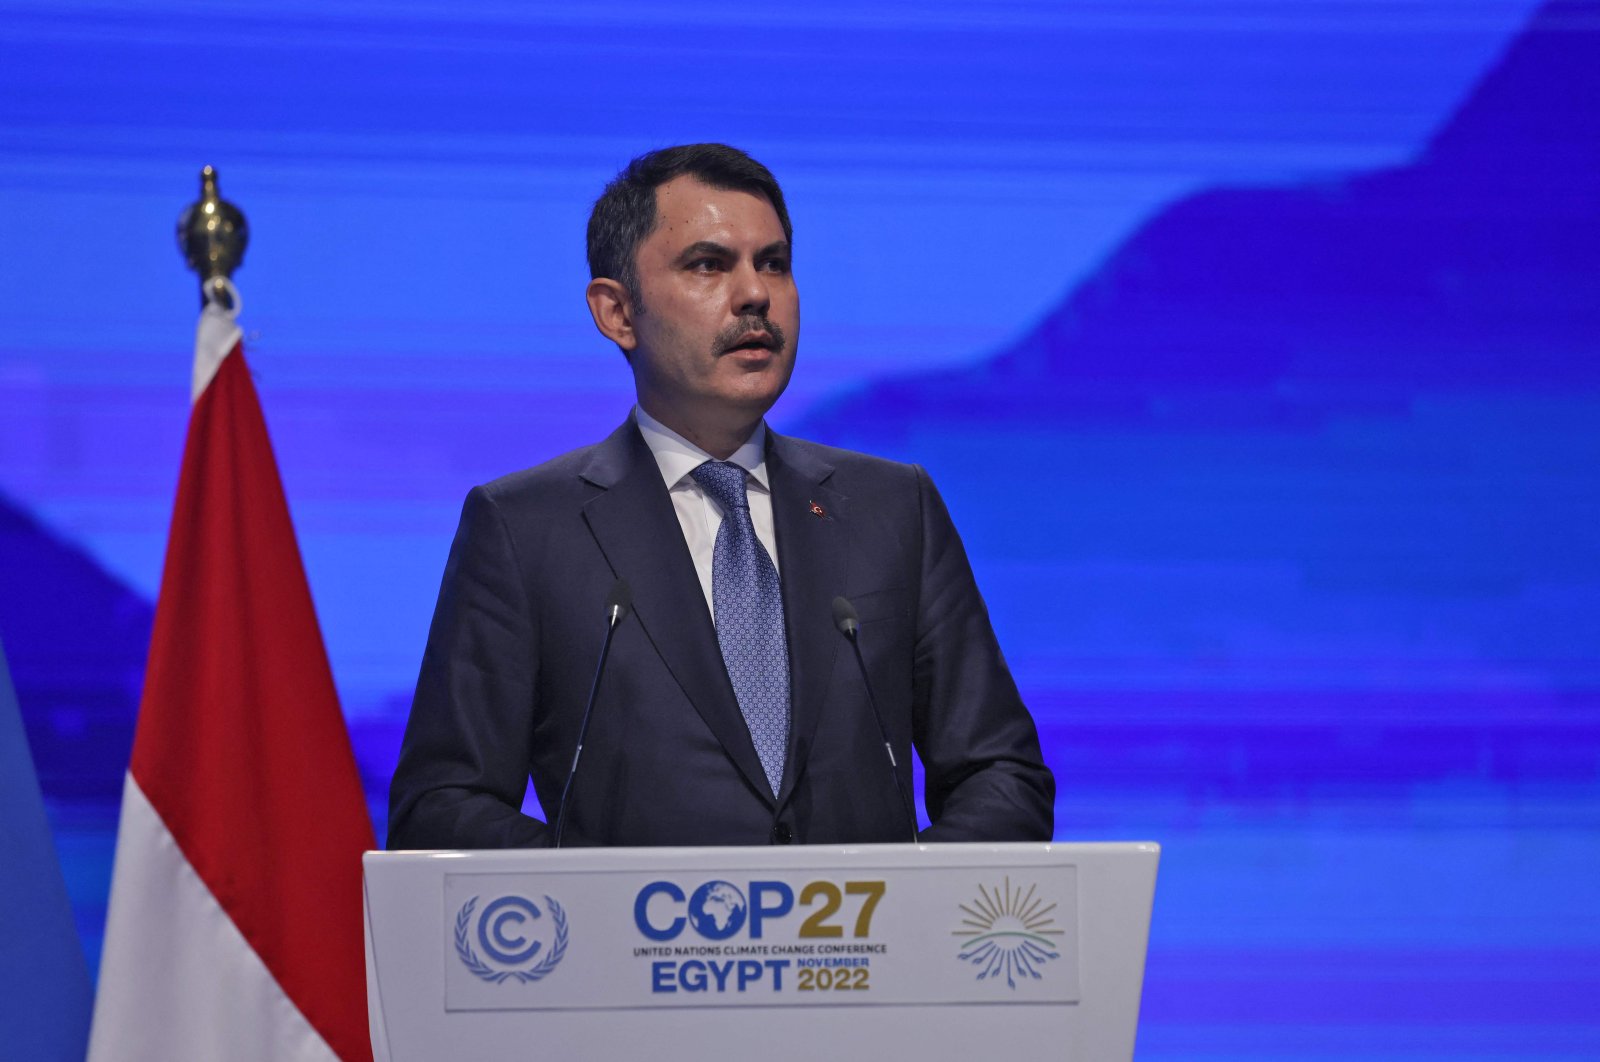 Minister of Environment, Urban Planning and Climate Change Murat Kurum delivers a speech at a COP27 conference, in Sharm el-Sheikh, Egypt, Nov. 15, 2022. (AFP Photo) 